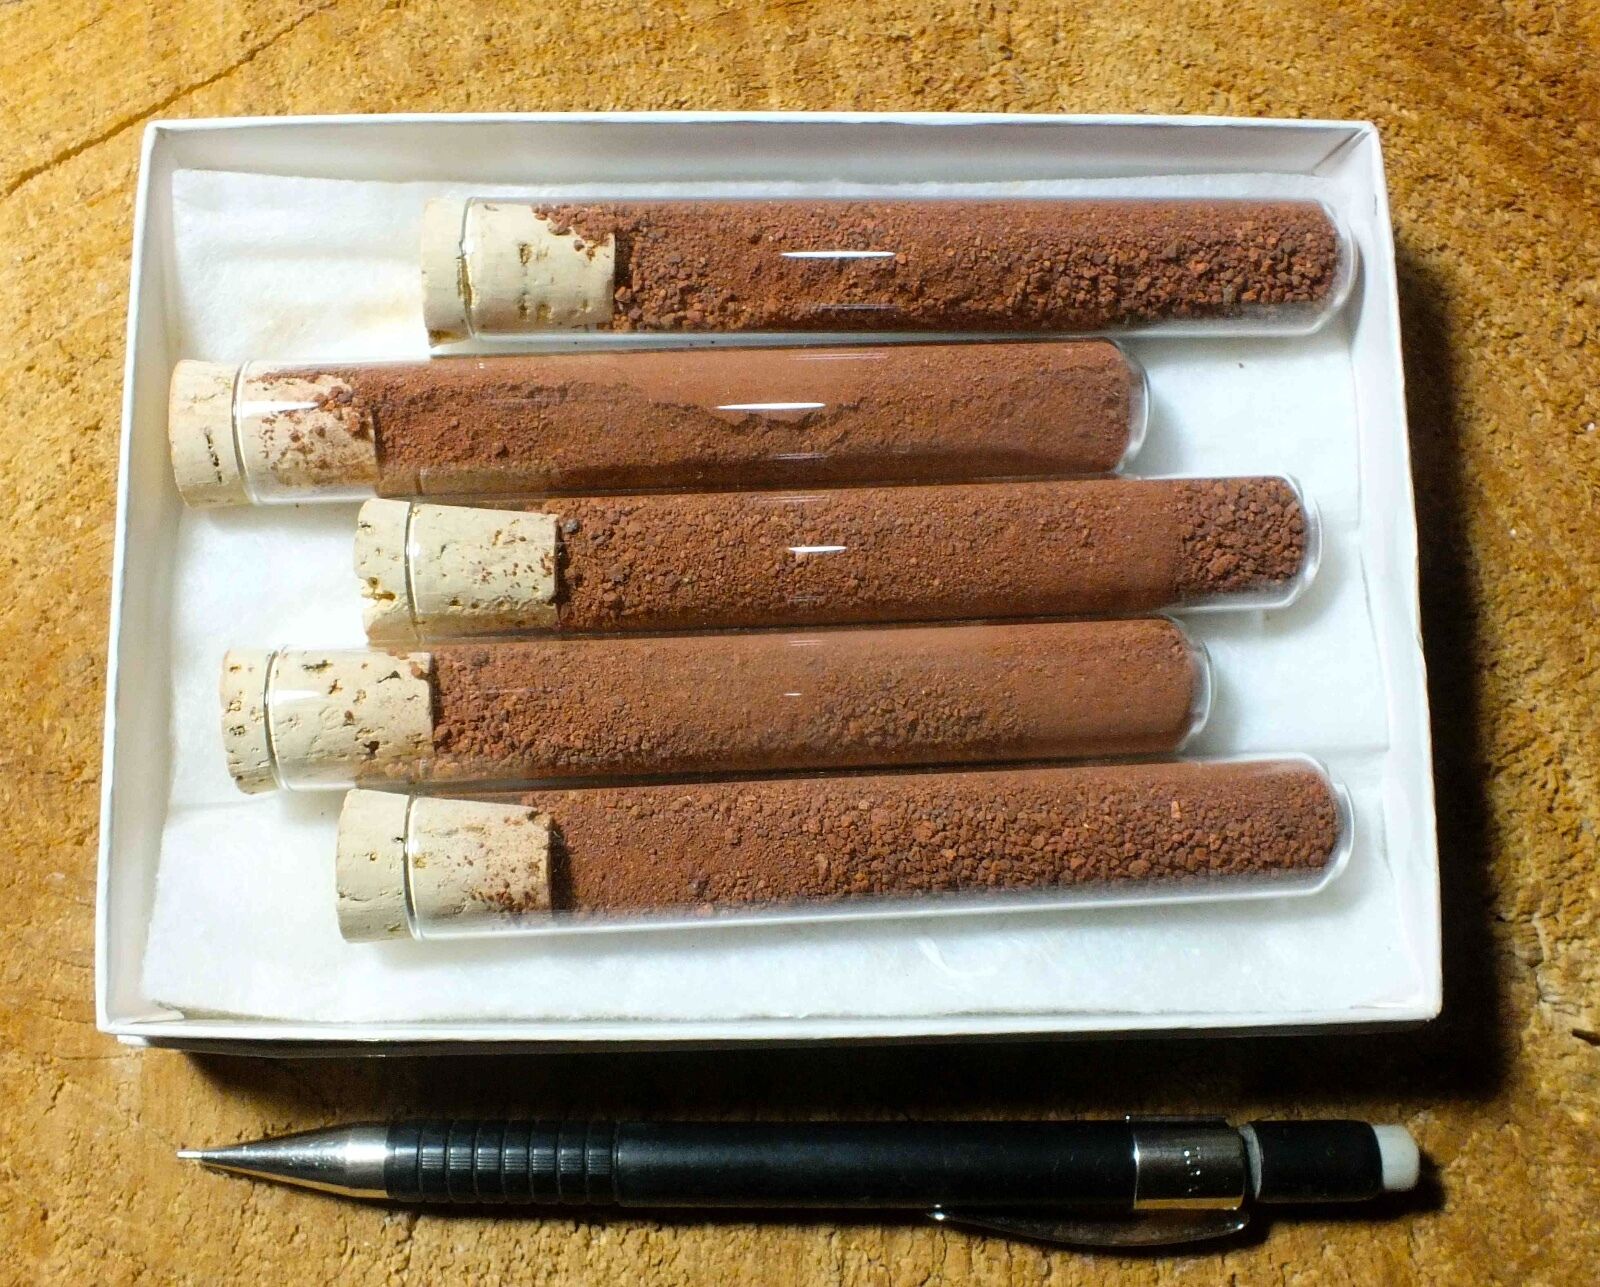 red ochre - set of 5 tubes of this natural pigment